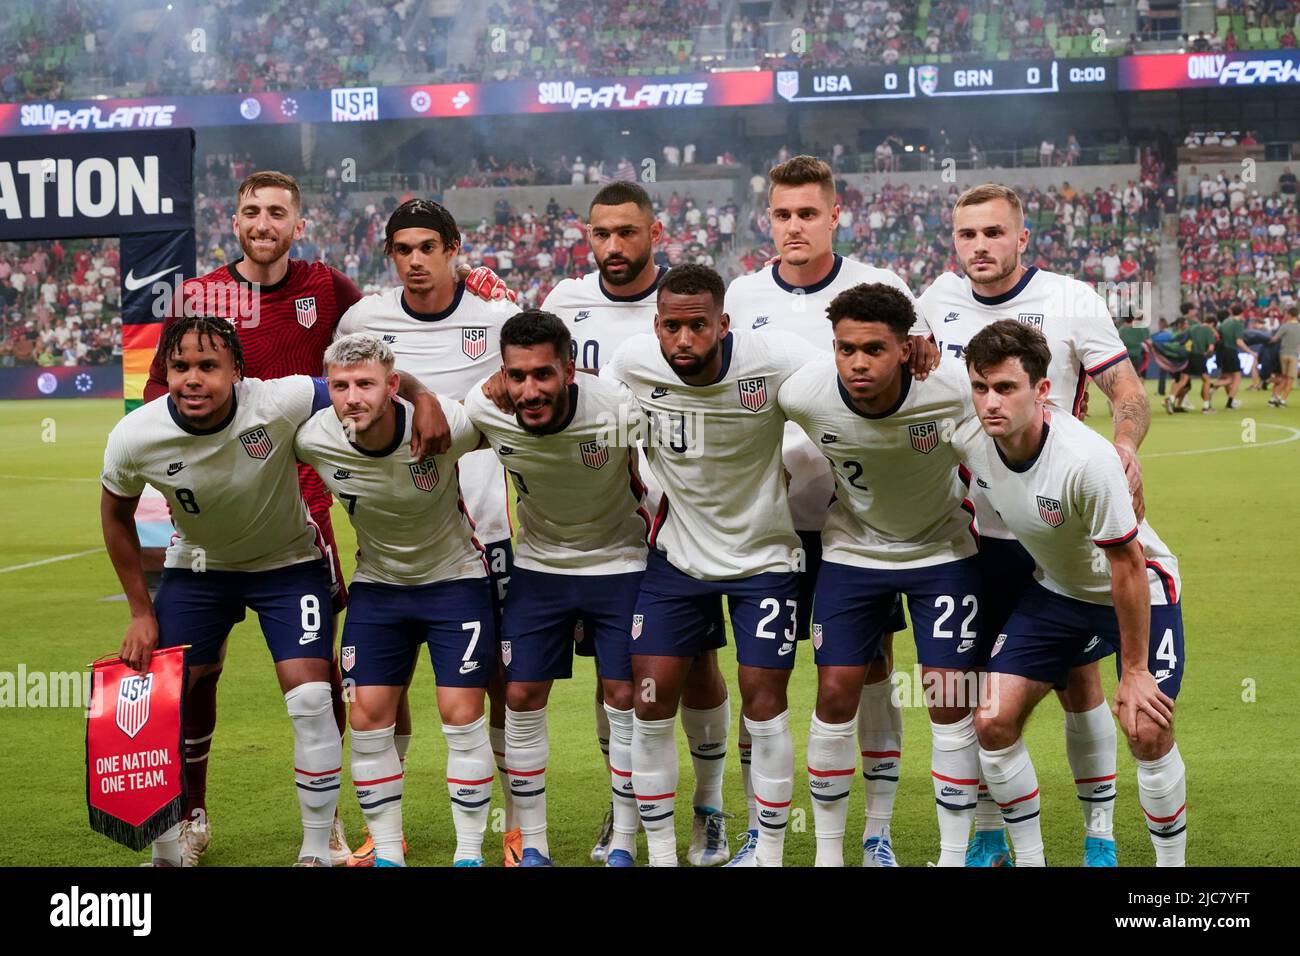 Austin Texas USA, 10th June, 2022: The USA team poses for a picture before the first half of a CONCACAF Nation's League match at Austin's Q2 Stadium. This is the U.S. Men's National Team's (USMNT) final match in the U.S. before the 2022 FIFA World Cup. Credit: Bob Daemmrich/Alamy Live News Stock Photo